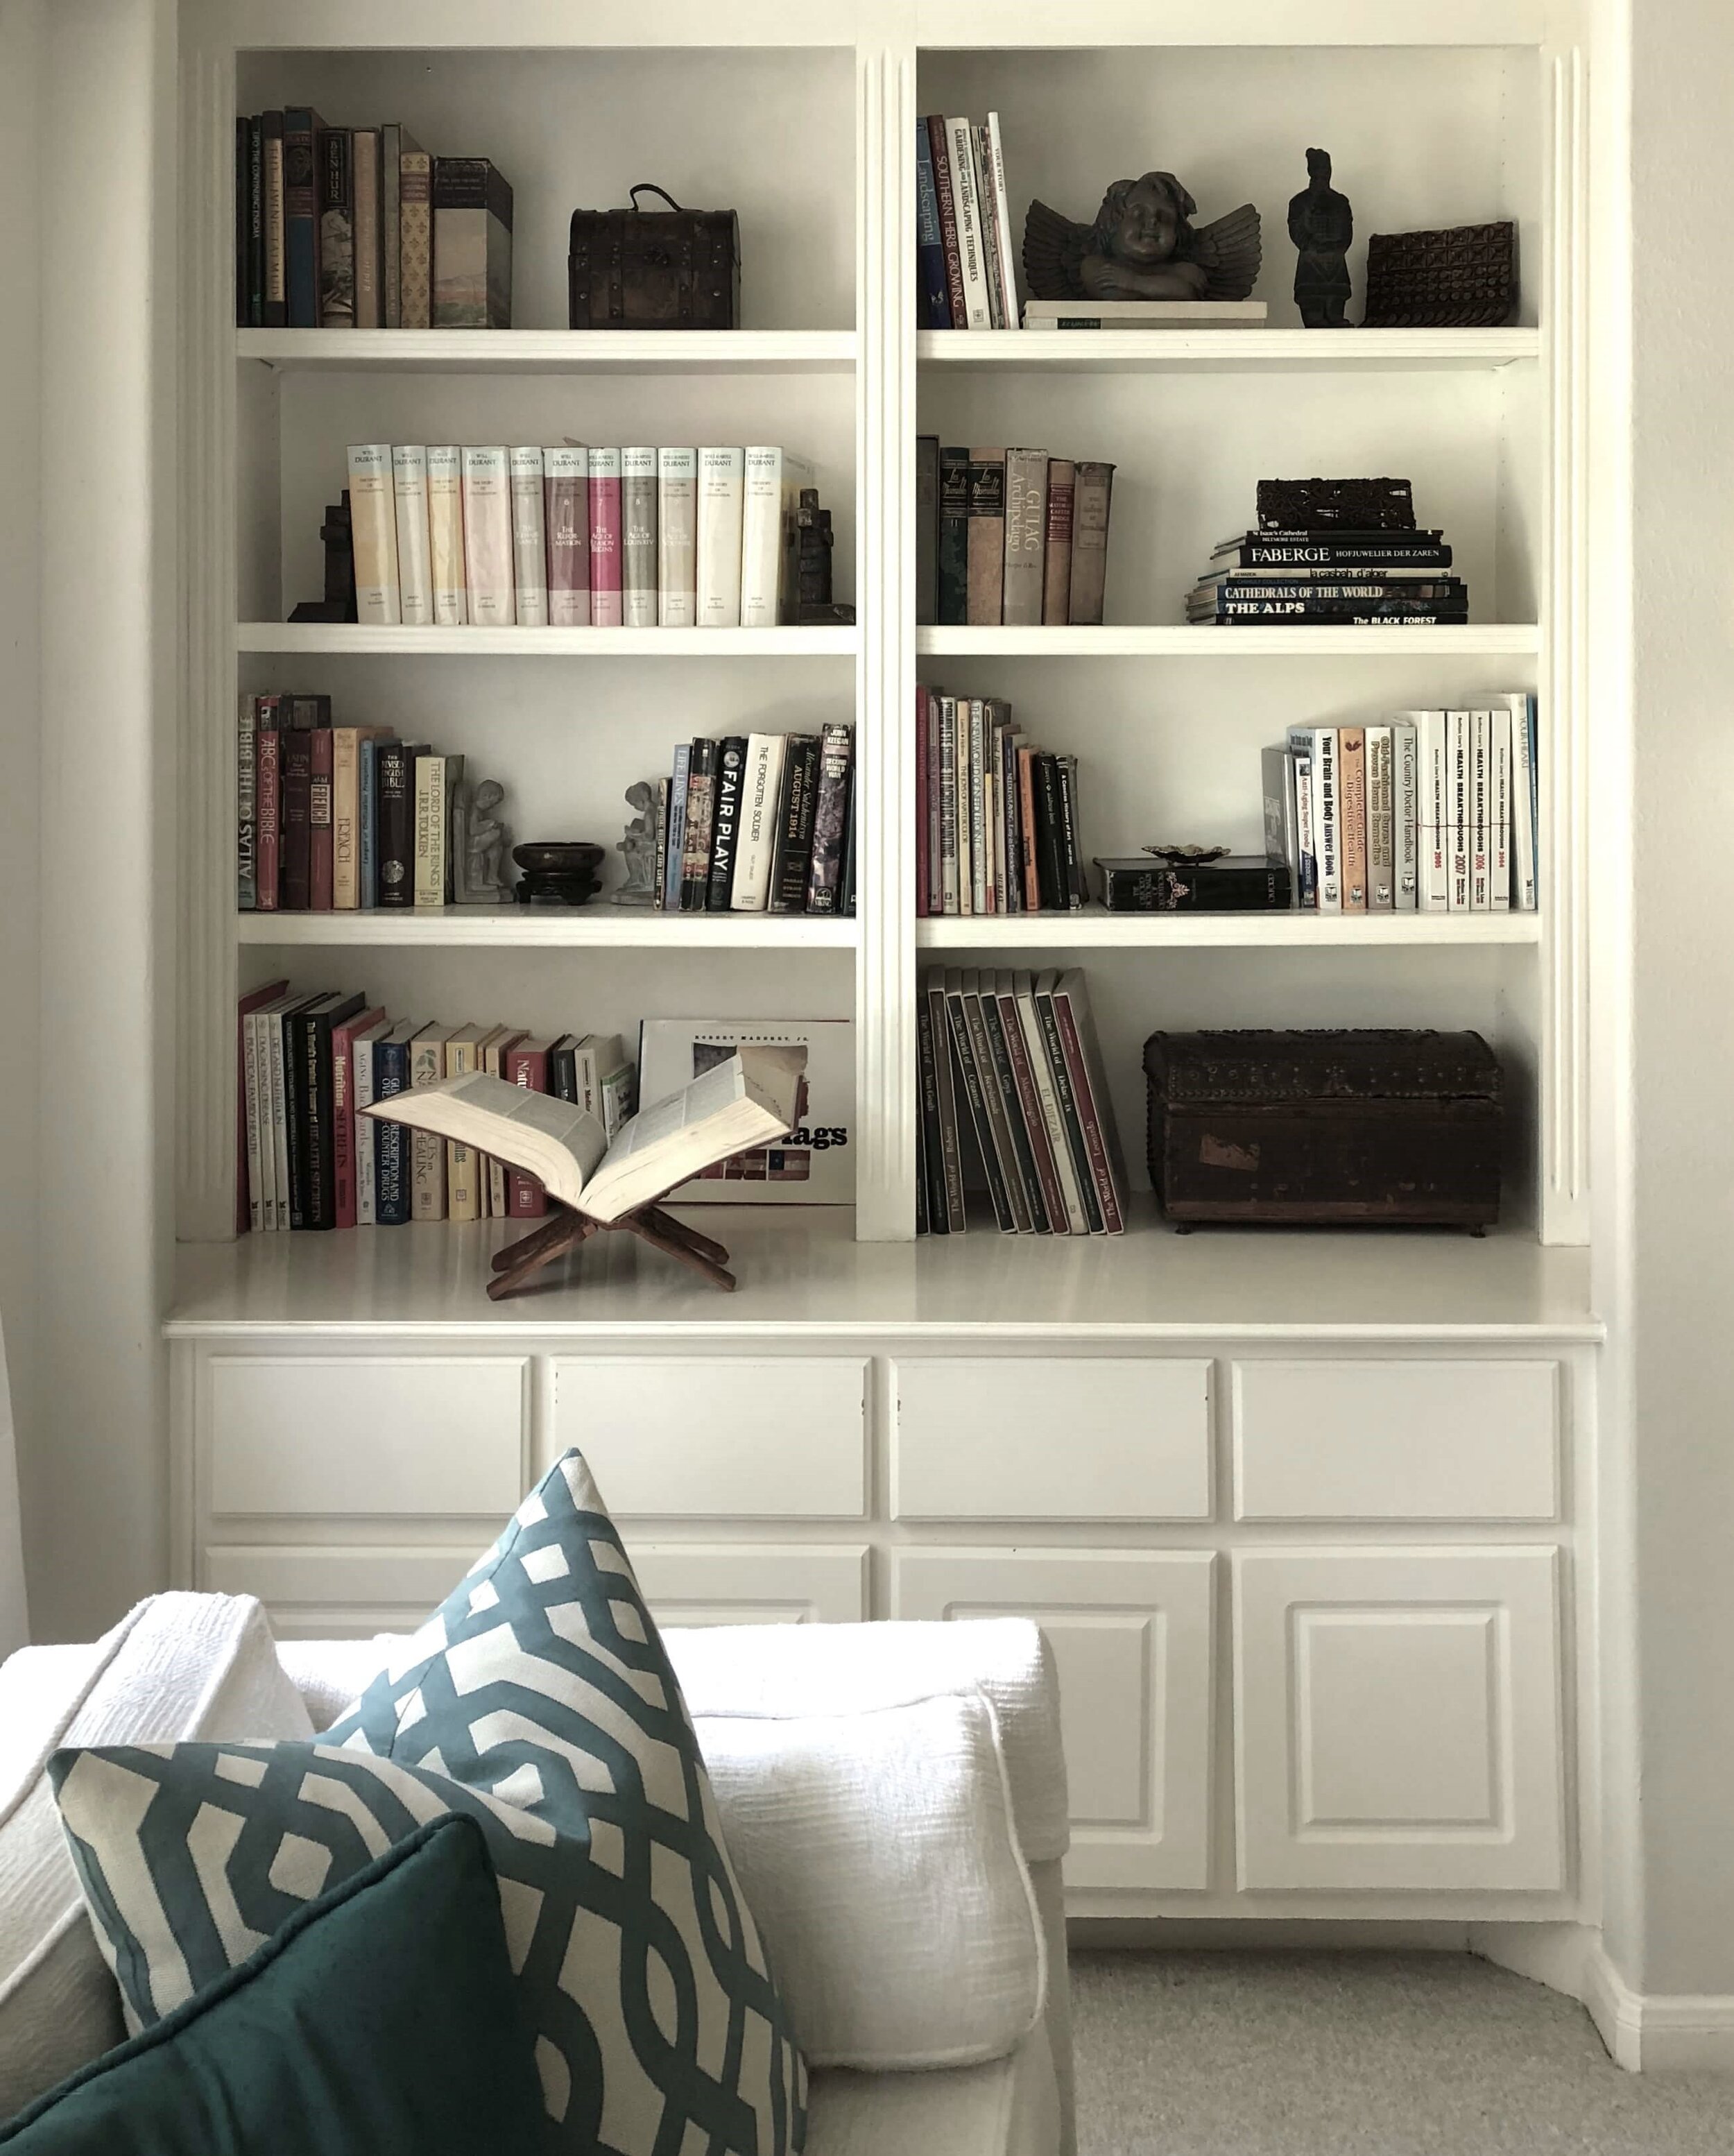 5 Of My Best Bookshelf Styling Tips + A Great Giveaway! — DESIGNED